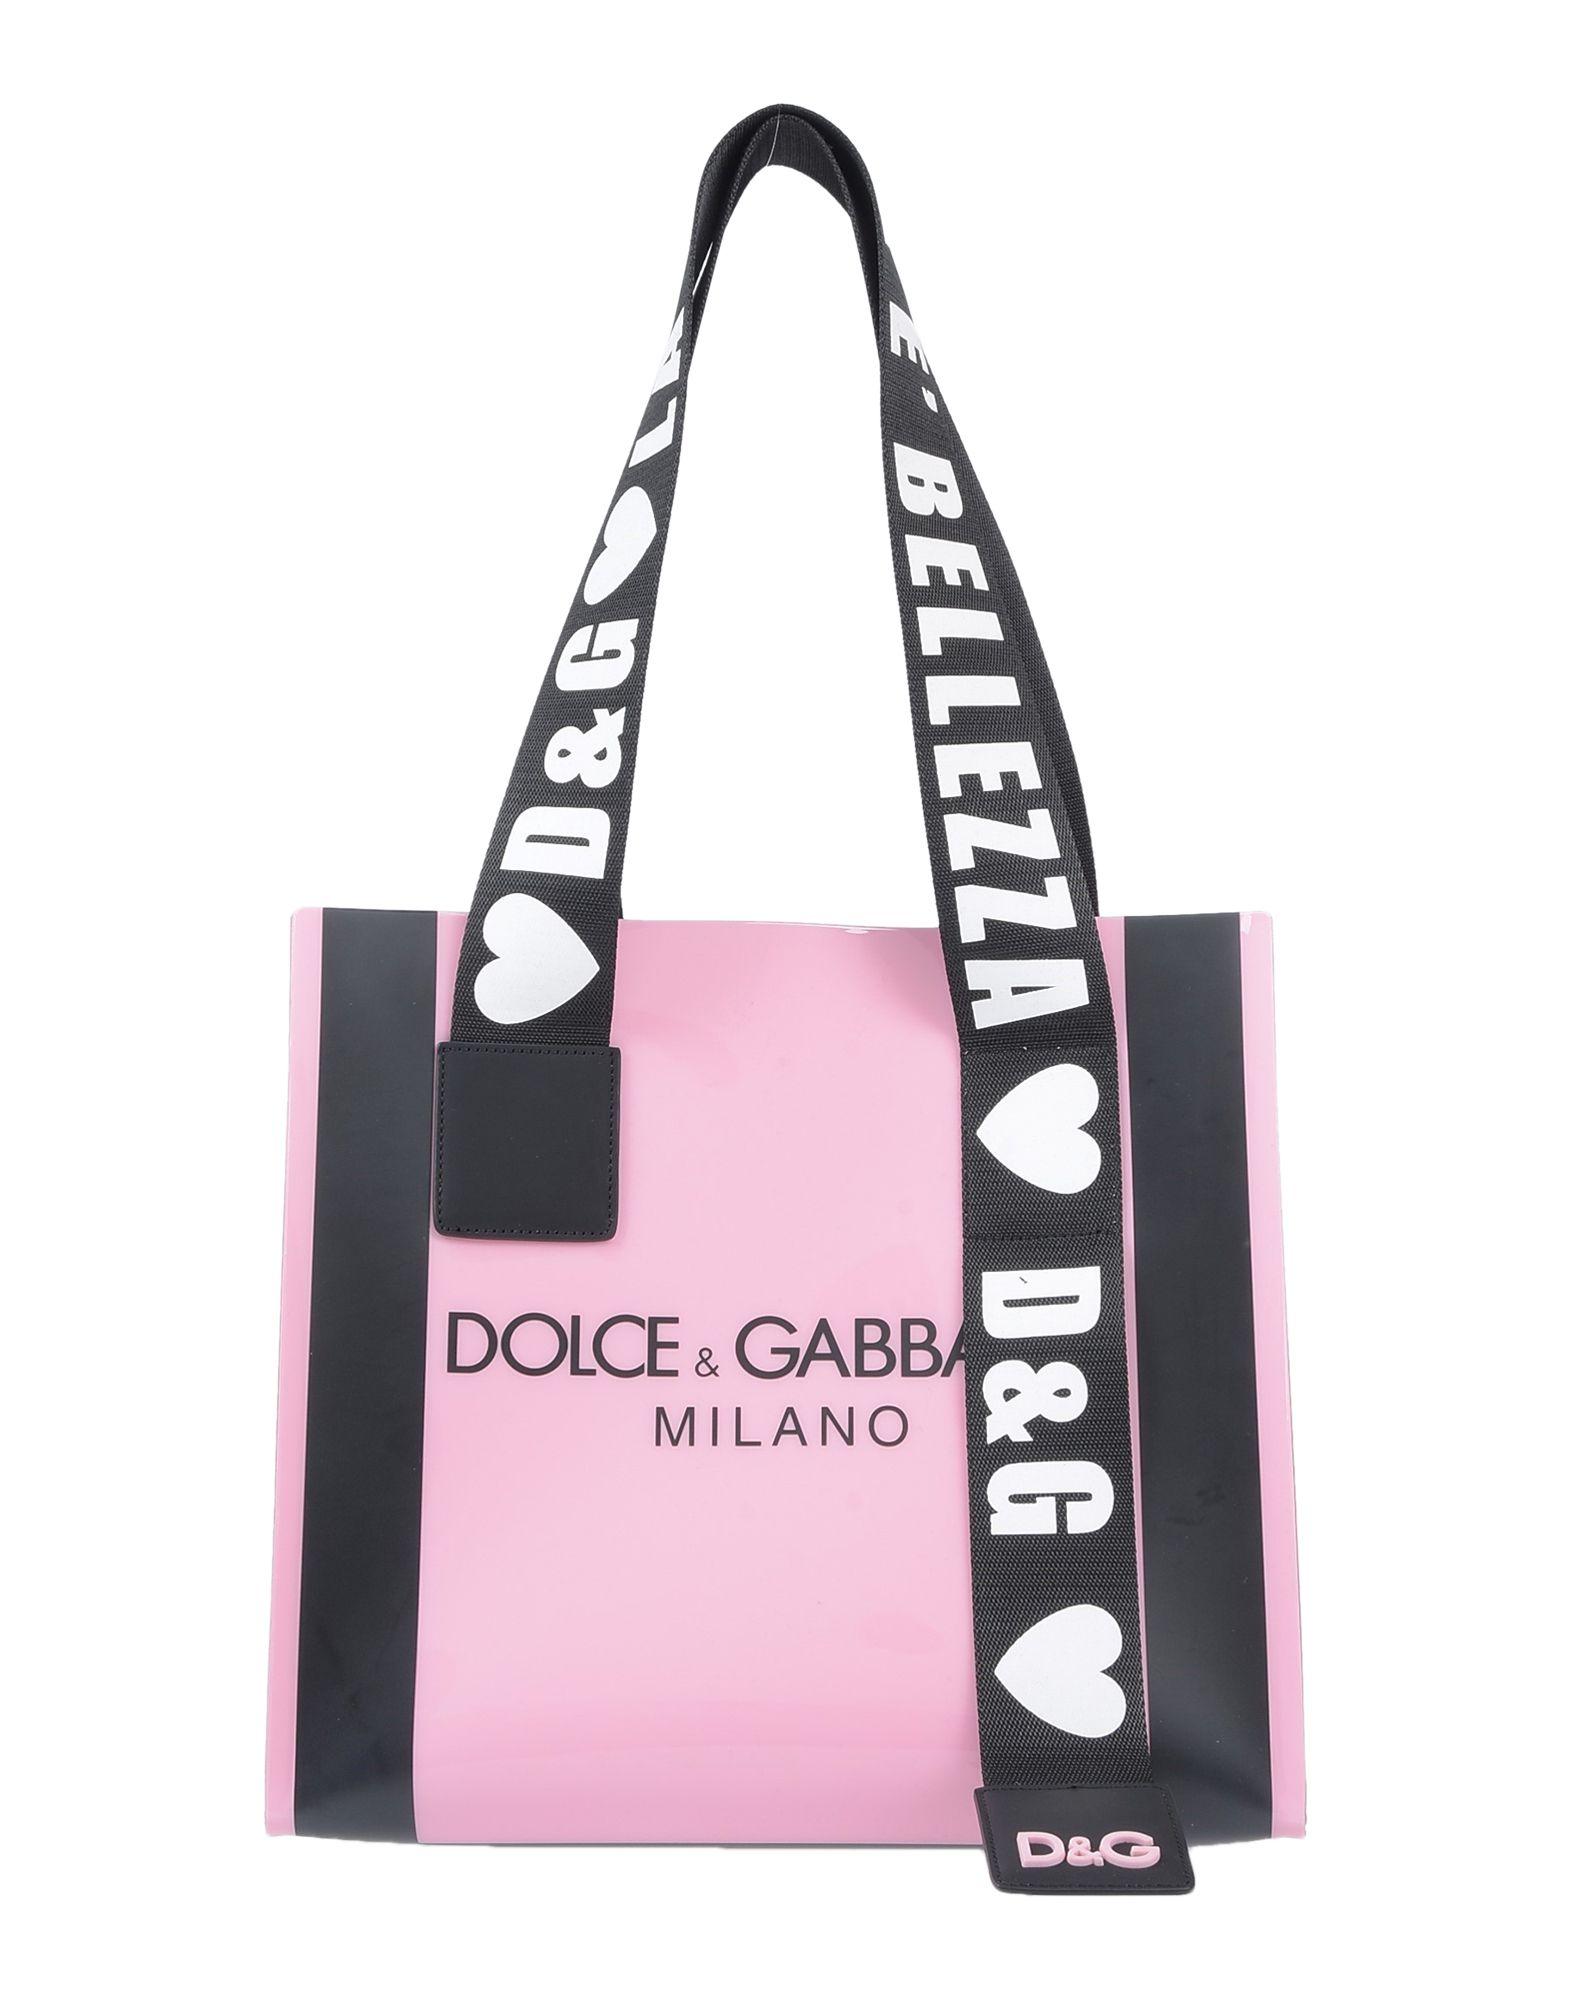 Dolce & Gabbana Synthetic Handbag in lt.Pink (Pink) - Save 40% - Lyst